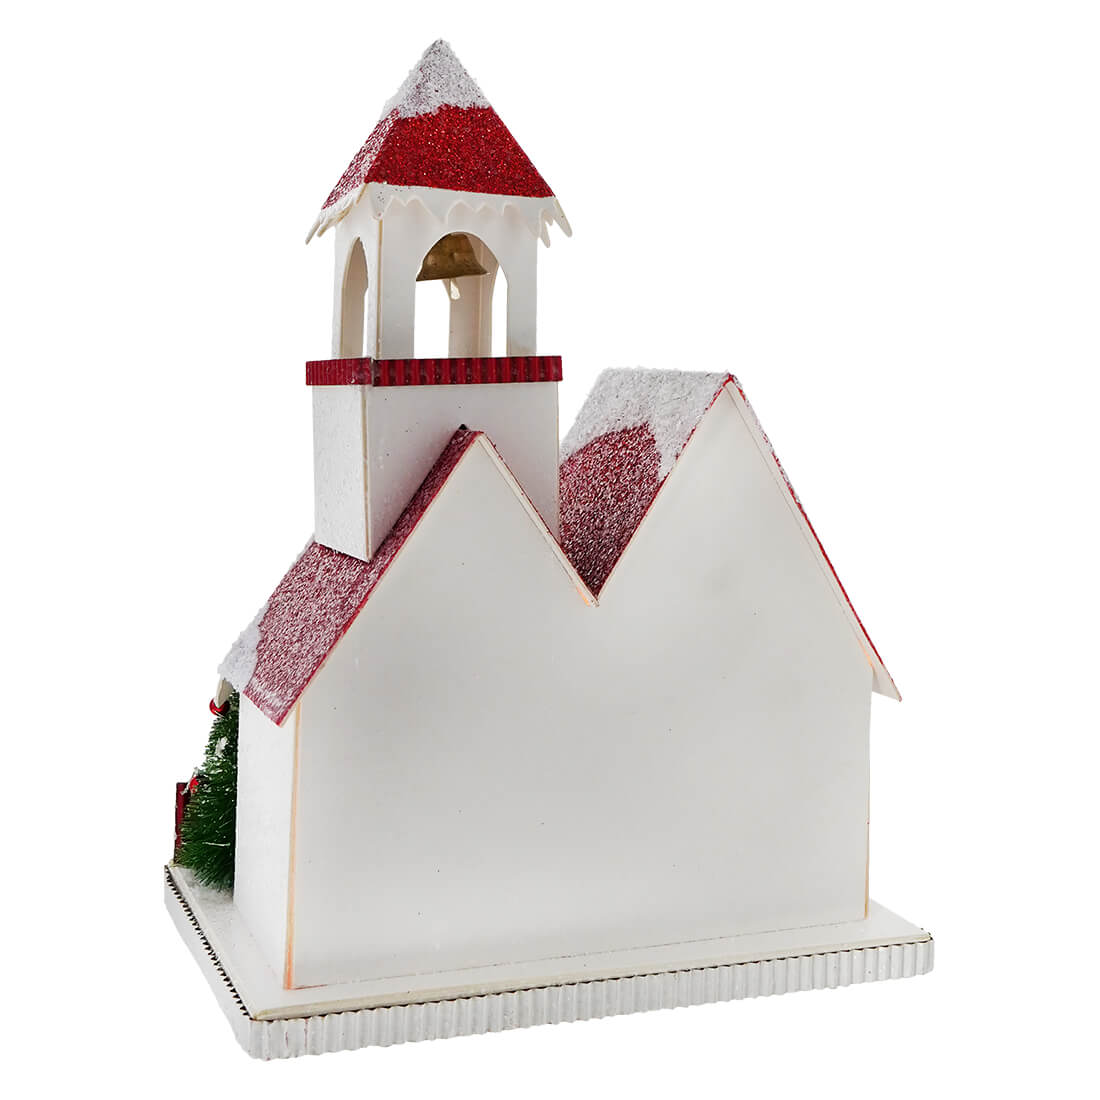 Snowy Glittered Red & White Lighted Cottage Church